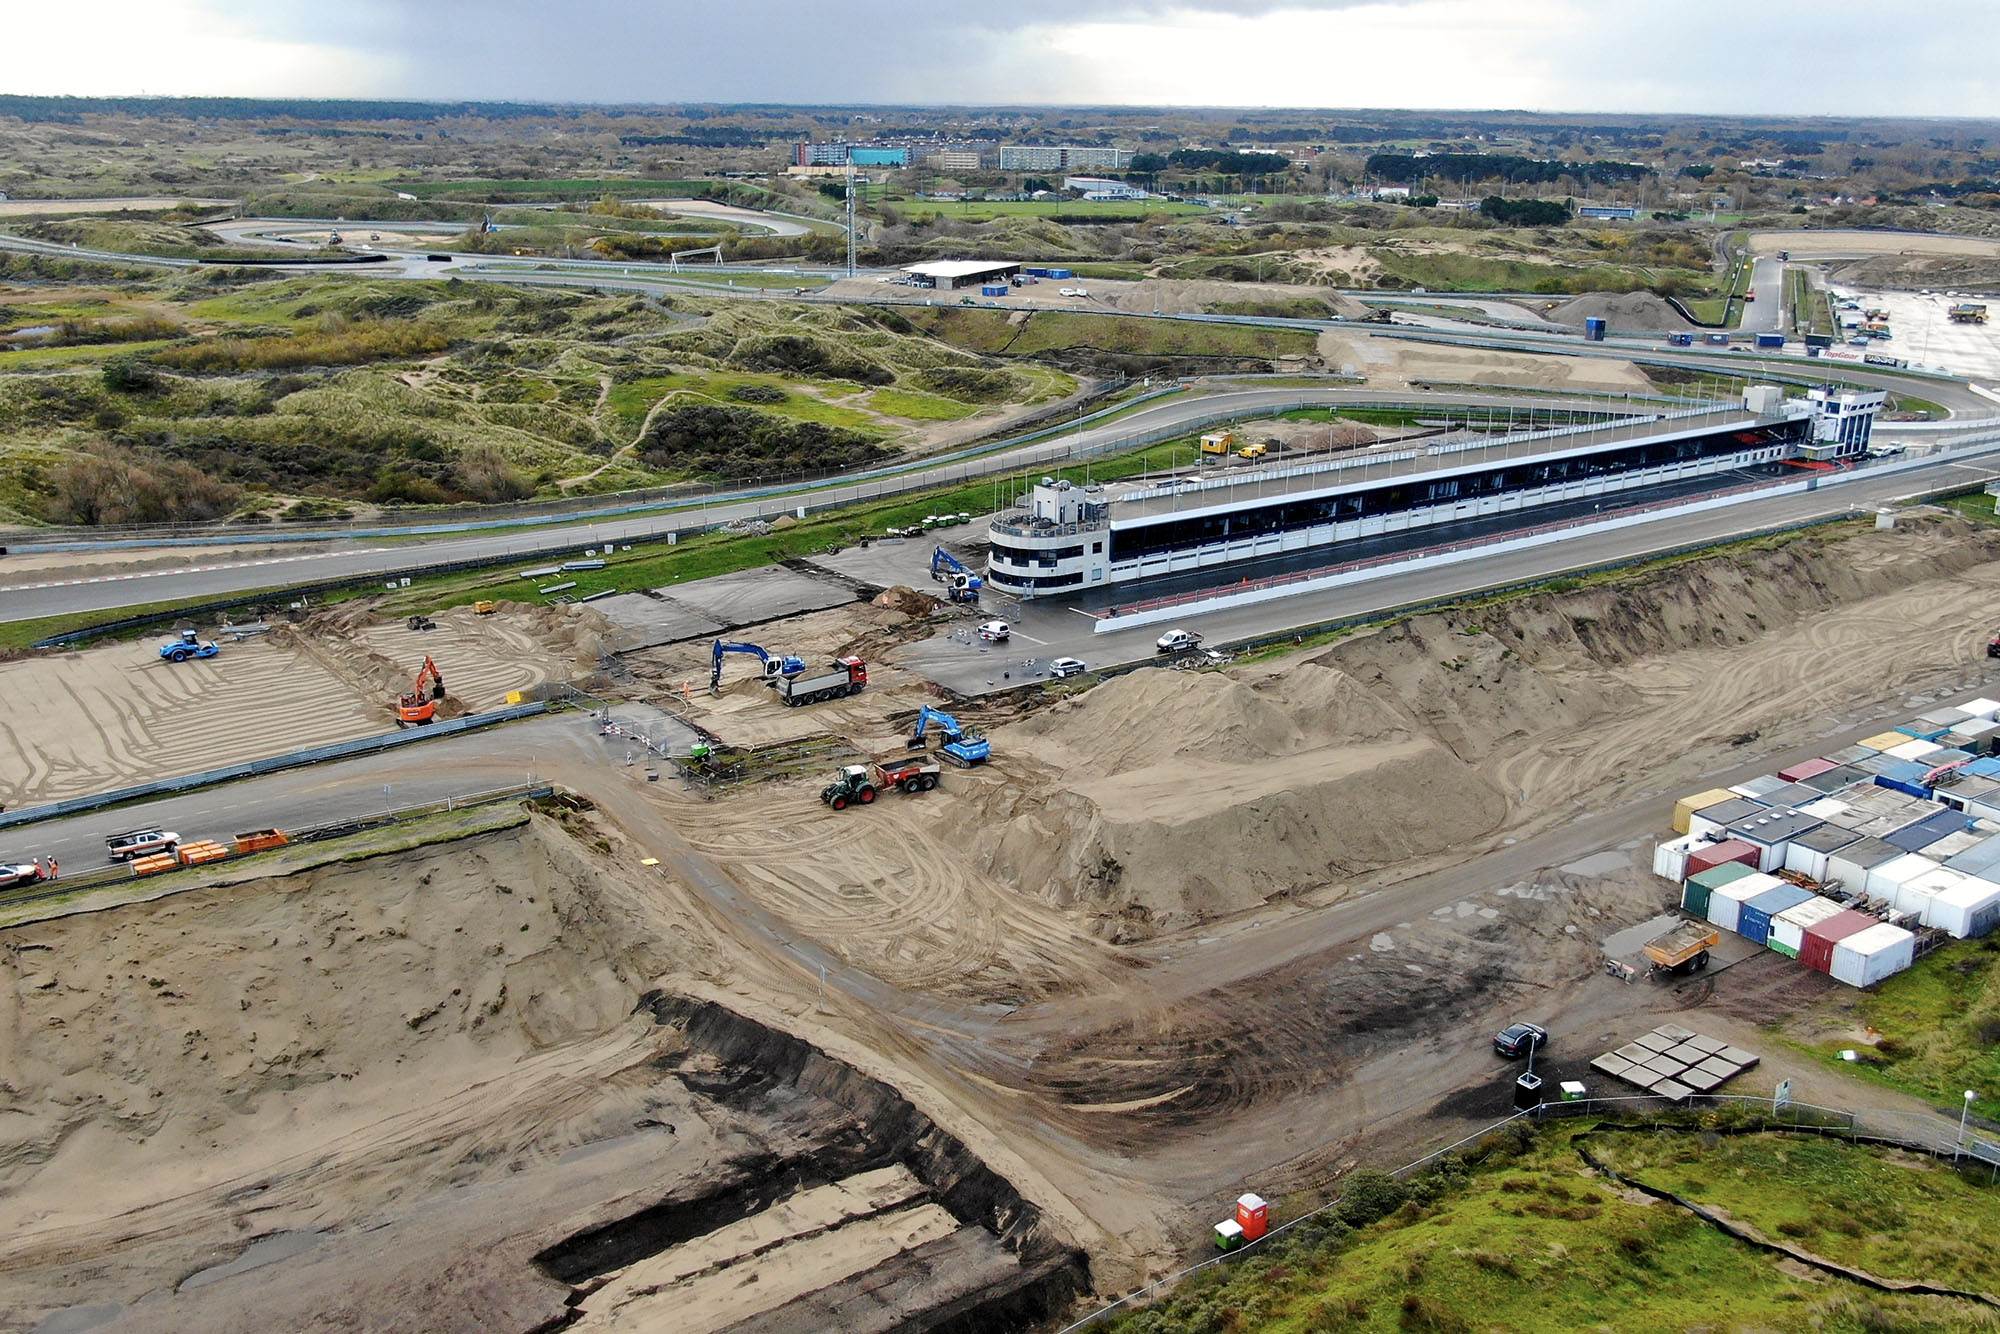 Construction work on the pit straight at Zandvoort ahead of the 2020 Dutch Grand Prix